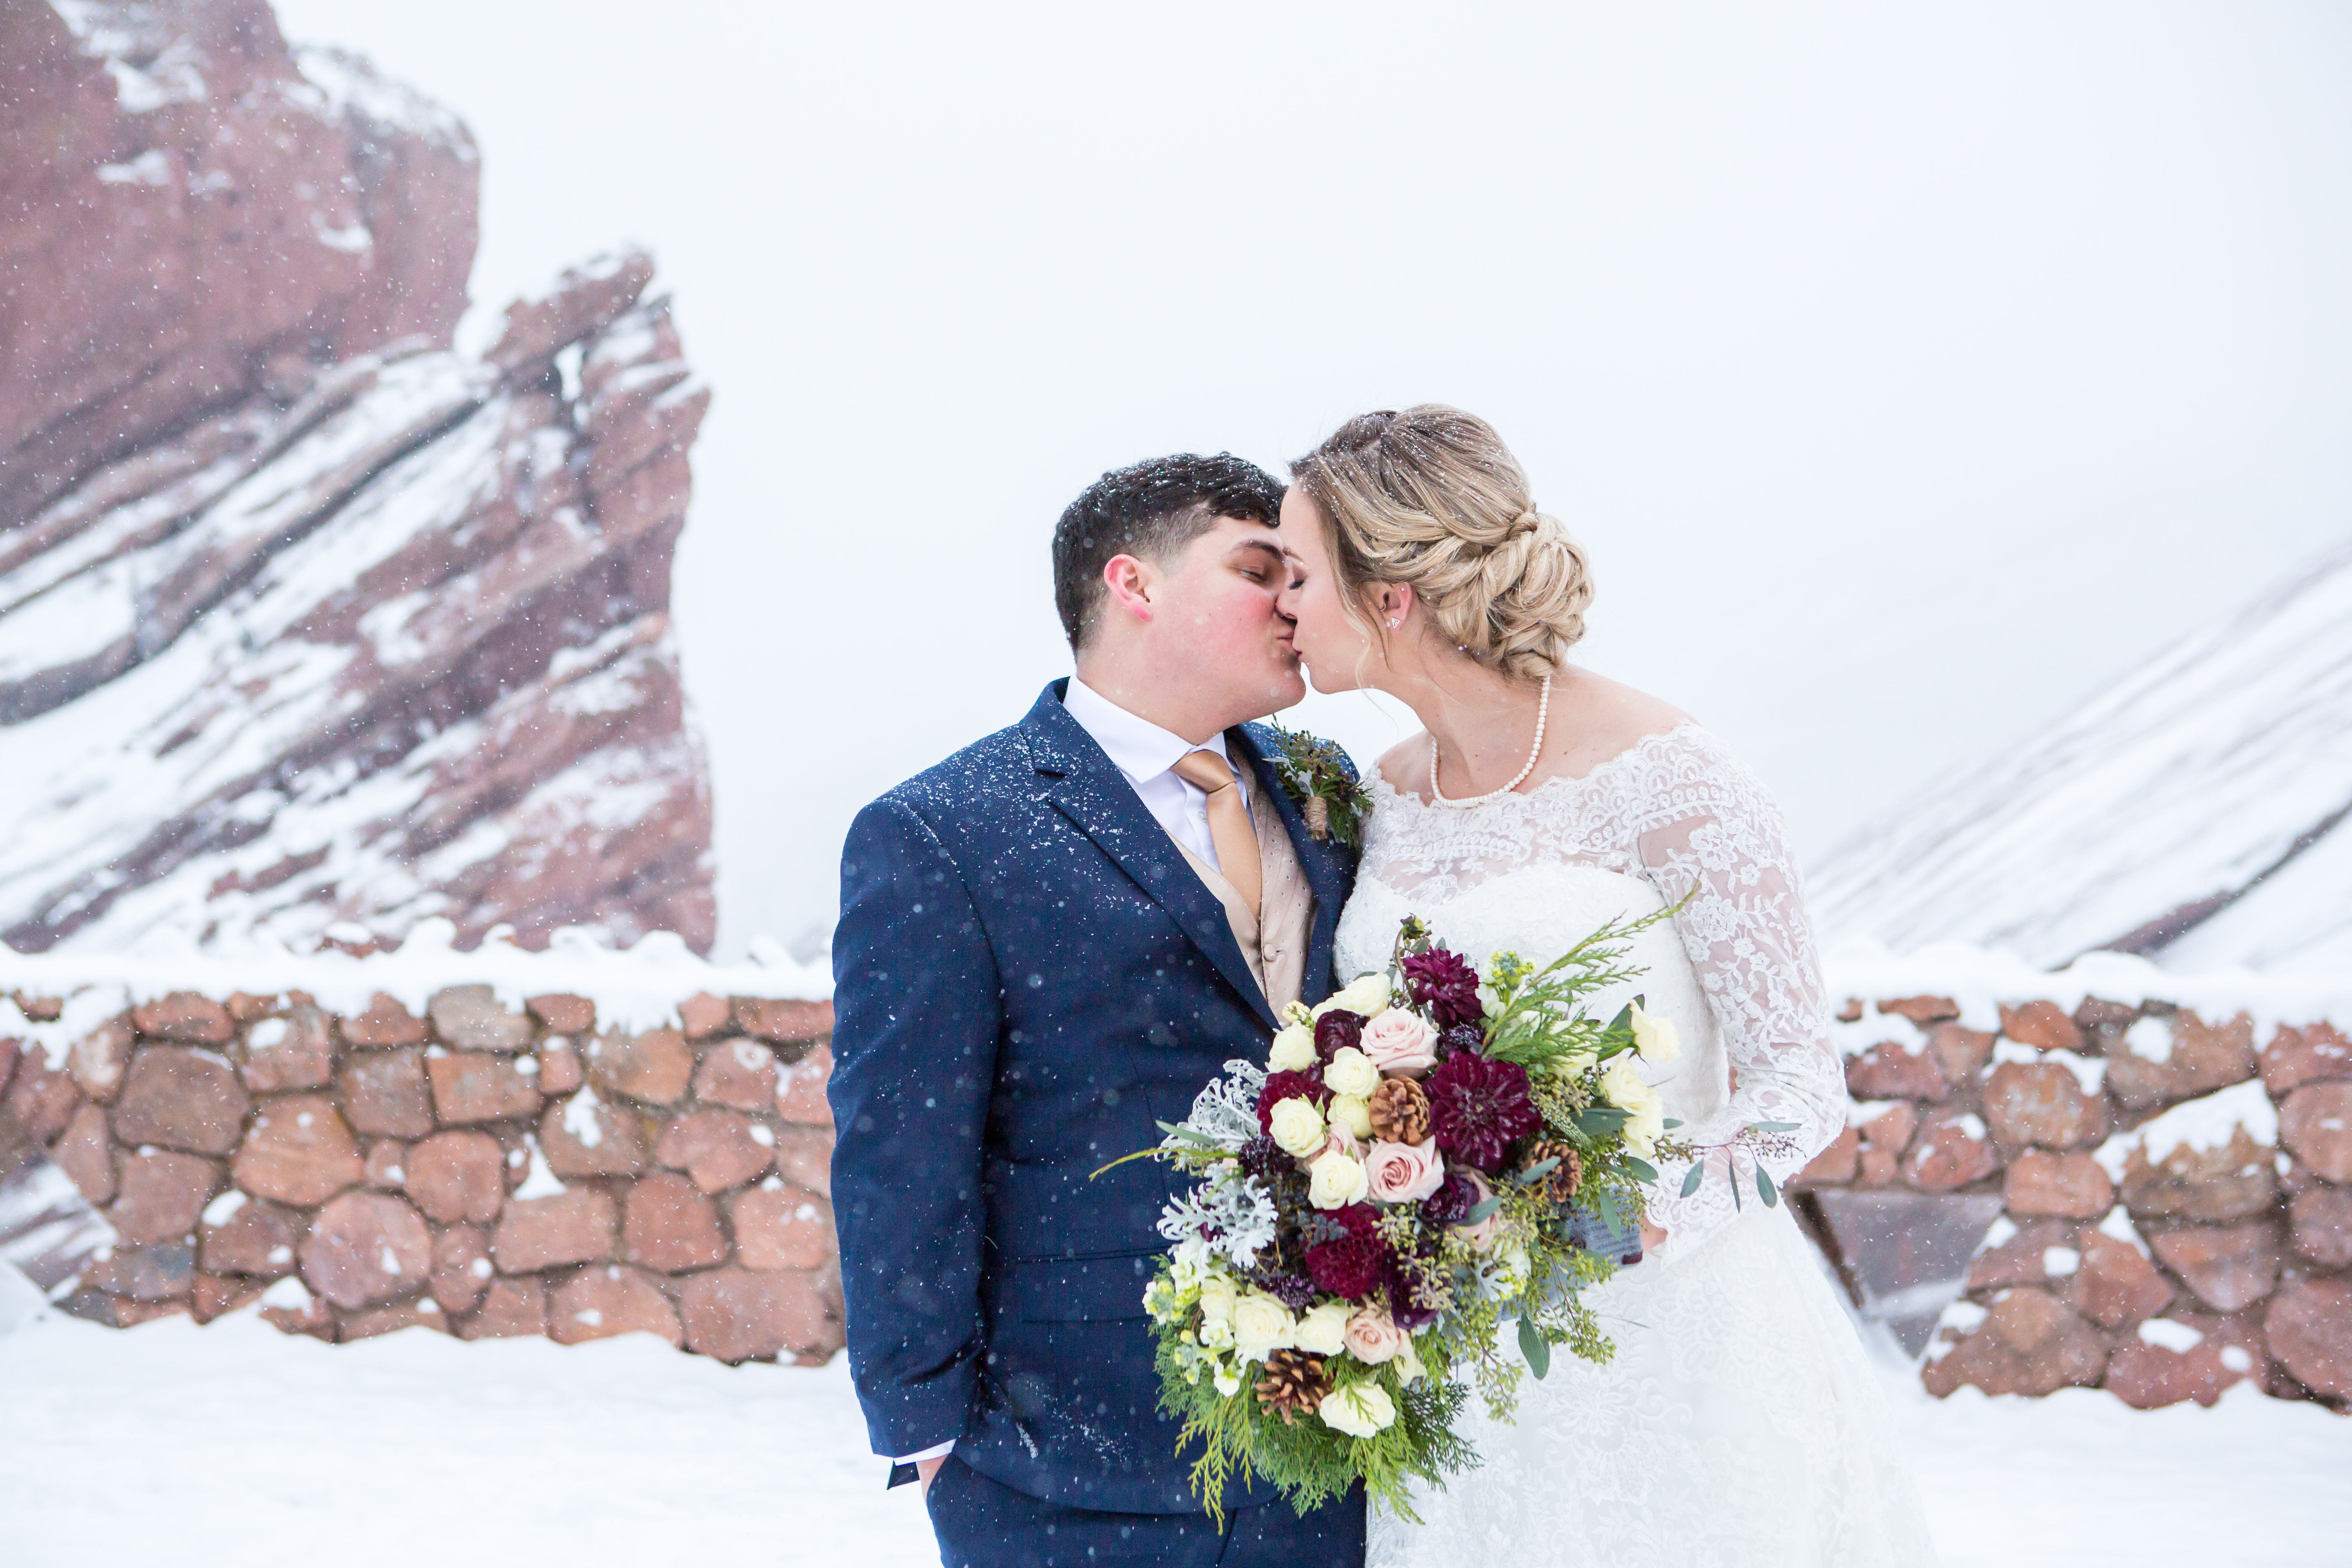 romantic wedding portrait of couple kissing in the snow - Nichole Emerson Photography